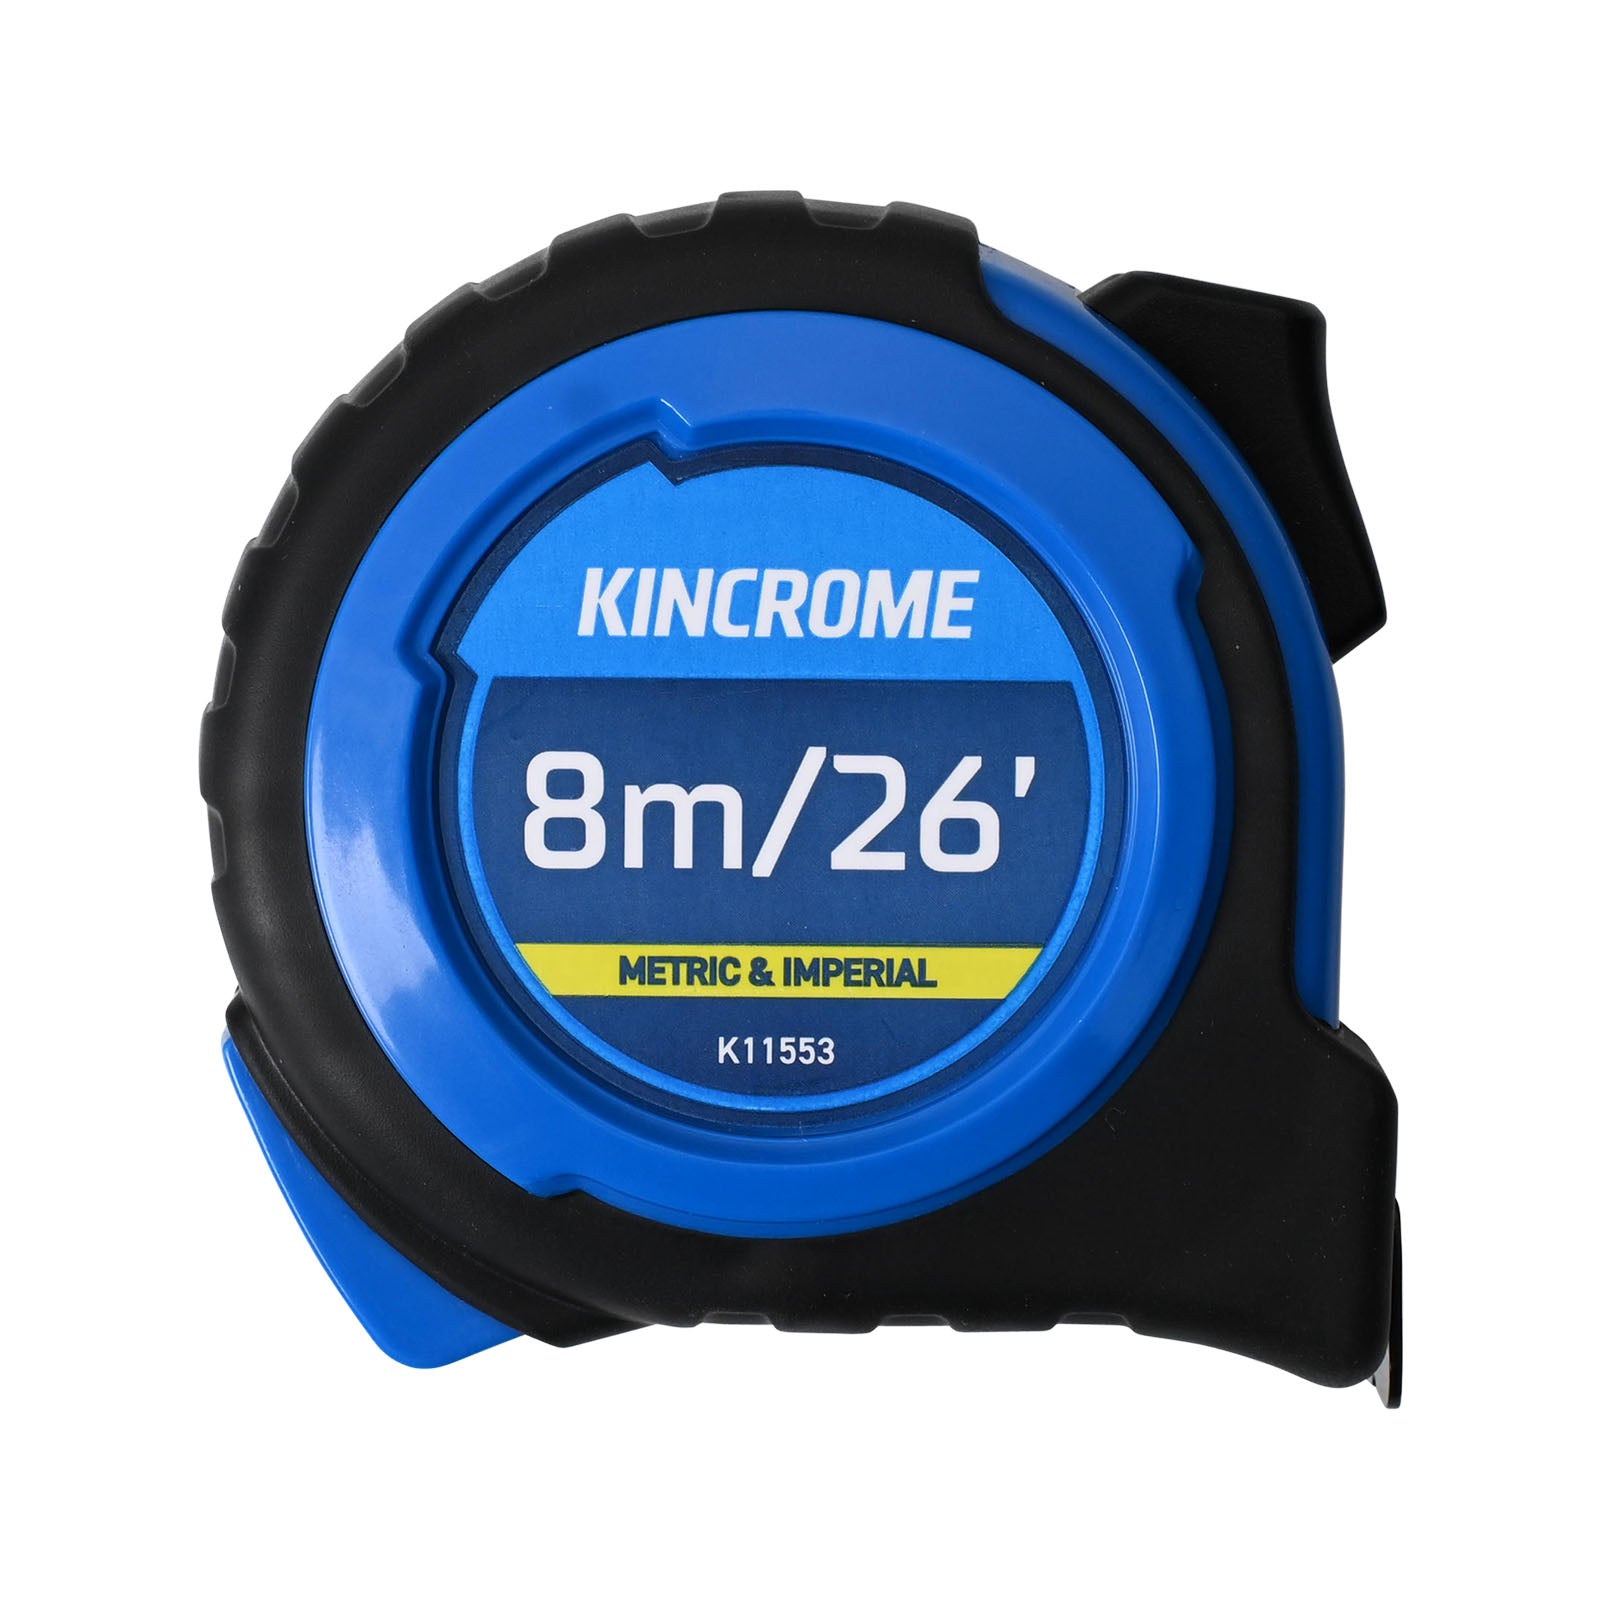 8M/26ft Tape Measure, Metric & Imperial - K11553 by Kincrome